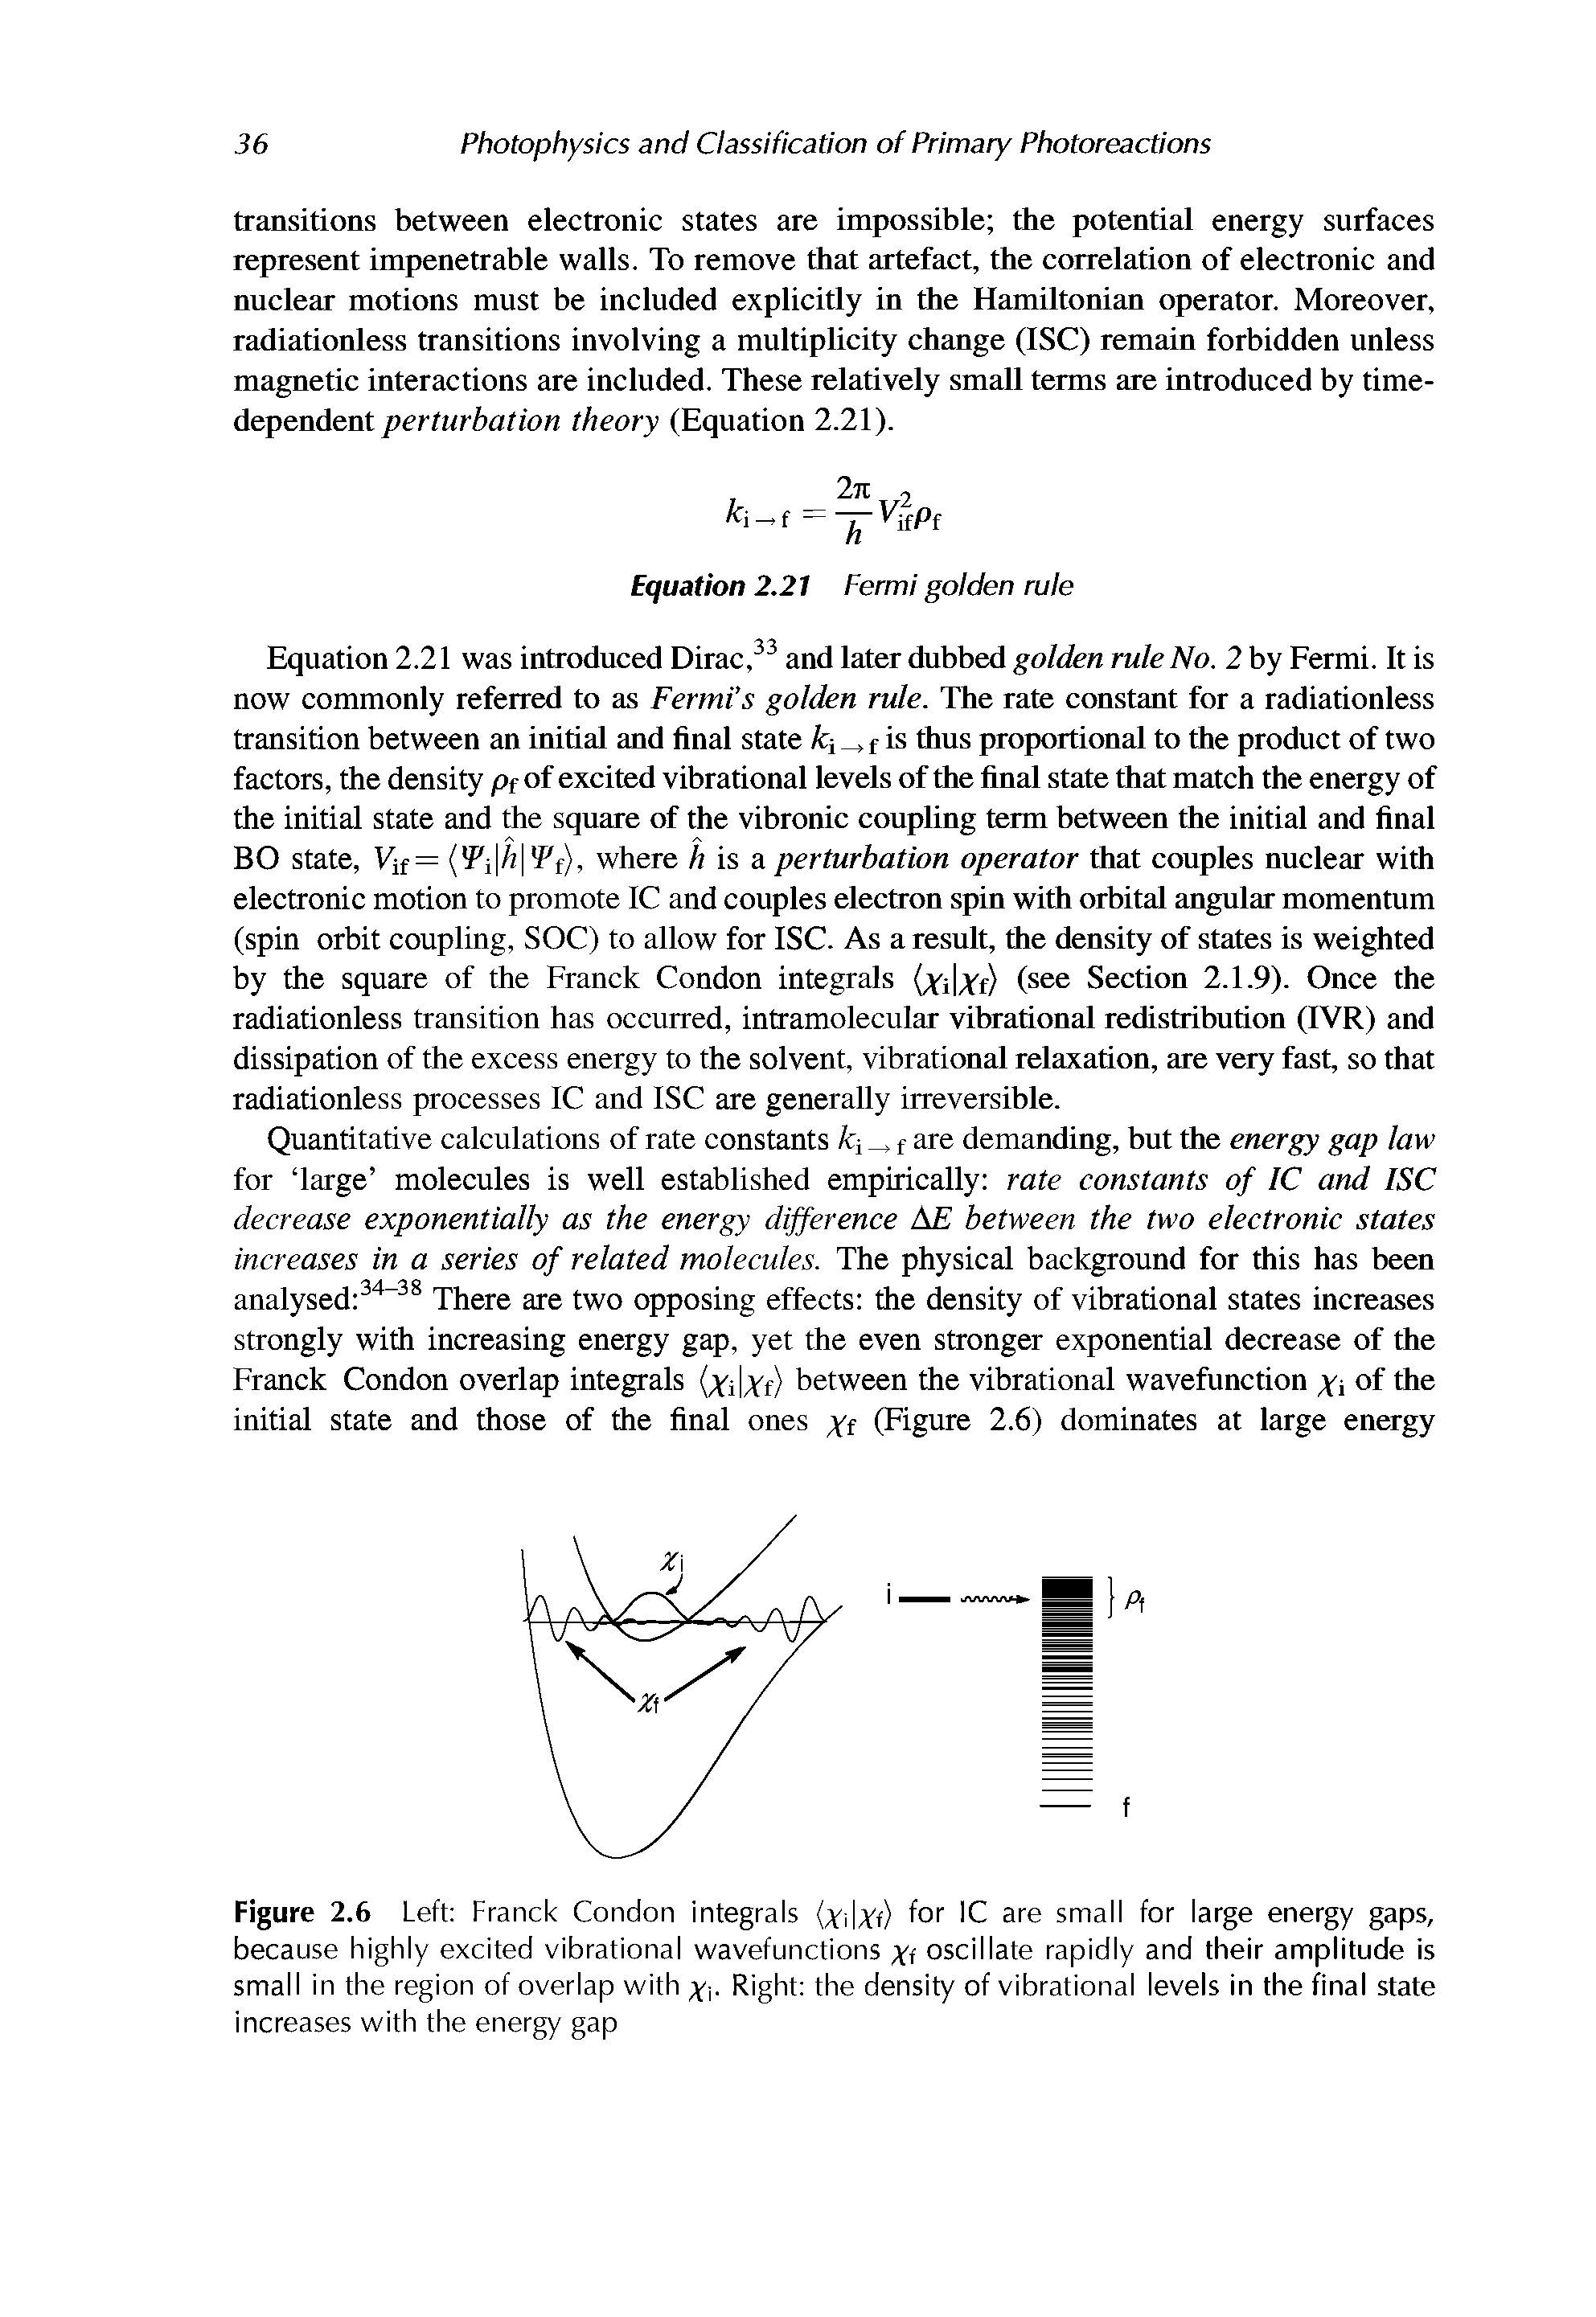 Figure 2.6 Left Franck Condon integrals (, f) for IC are small for large energy gaps, because highly excited vibrational wavefunctions xt oscillate rapidly and their amplitude is small in the region of overlap with x - Right the density of vibrational levels in the final state increases with the energy gap...